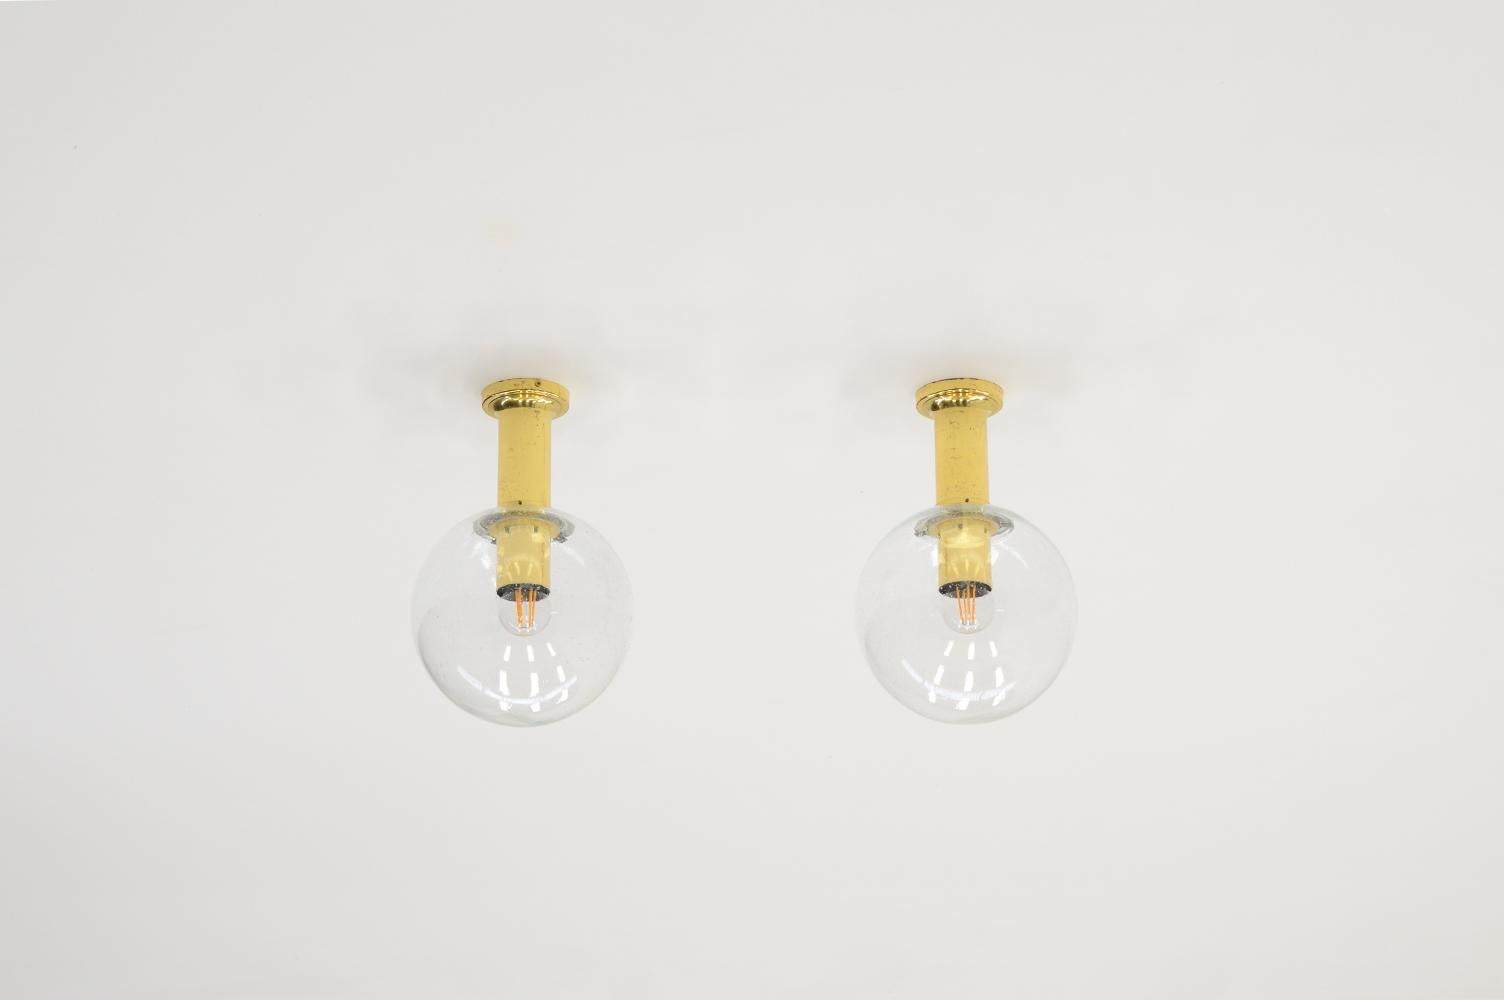 Set of 2 ceiling lamps from Glashütte Limburg, Germany 1970s. Brass fixture with bubble glass globe. Holds an E27 bulb. Marked on the inside. Light wear and patina on the brass. In good vintage condition. 4 piece in stock.